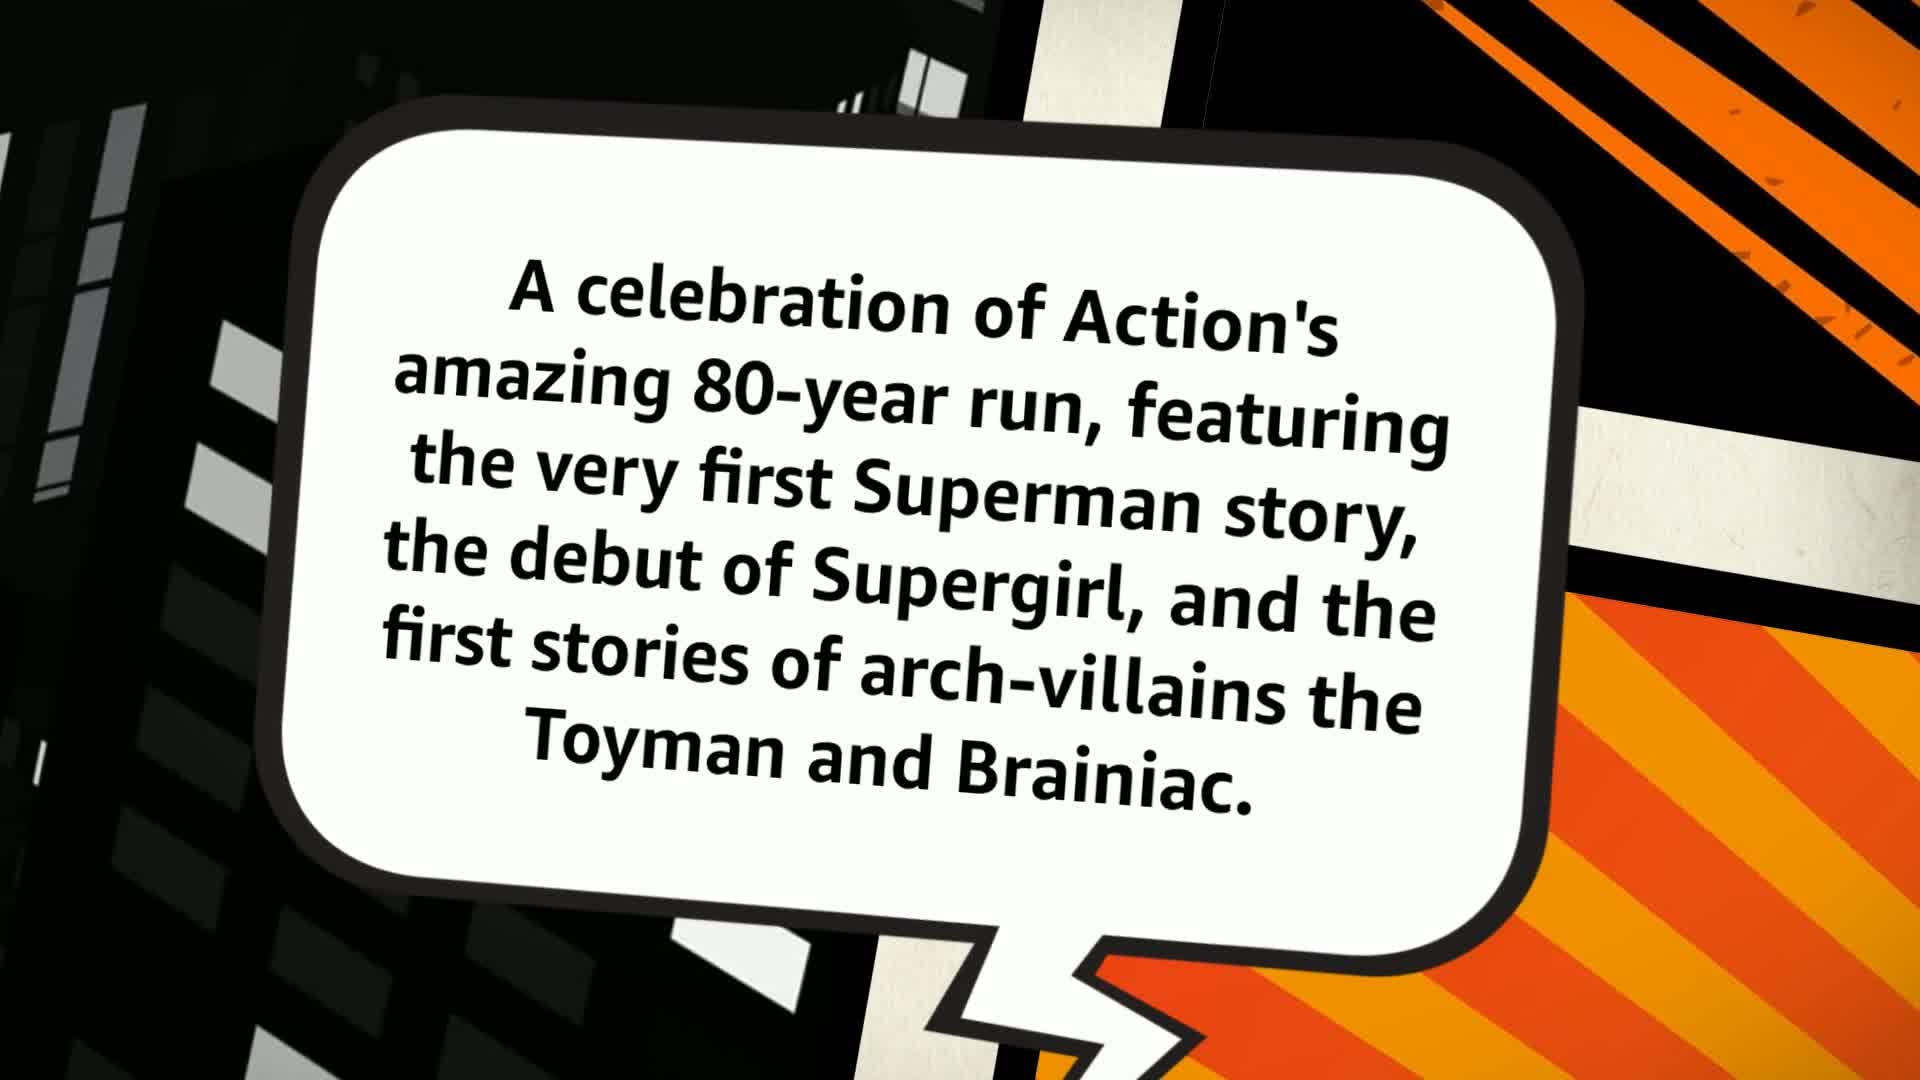 Action Comics: 80 Years of Superman Deluxe Edition